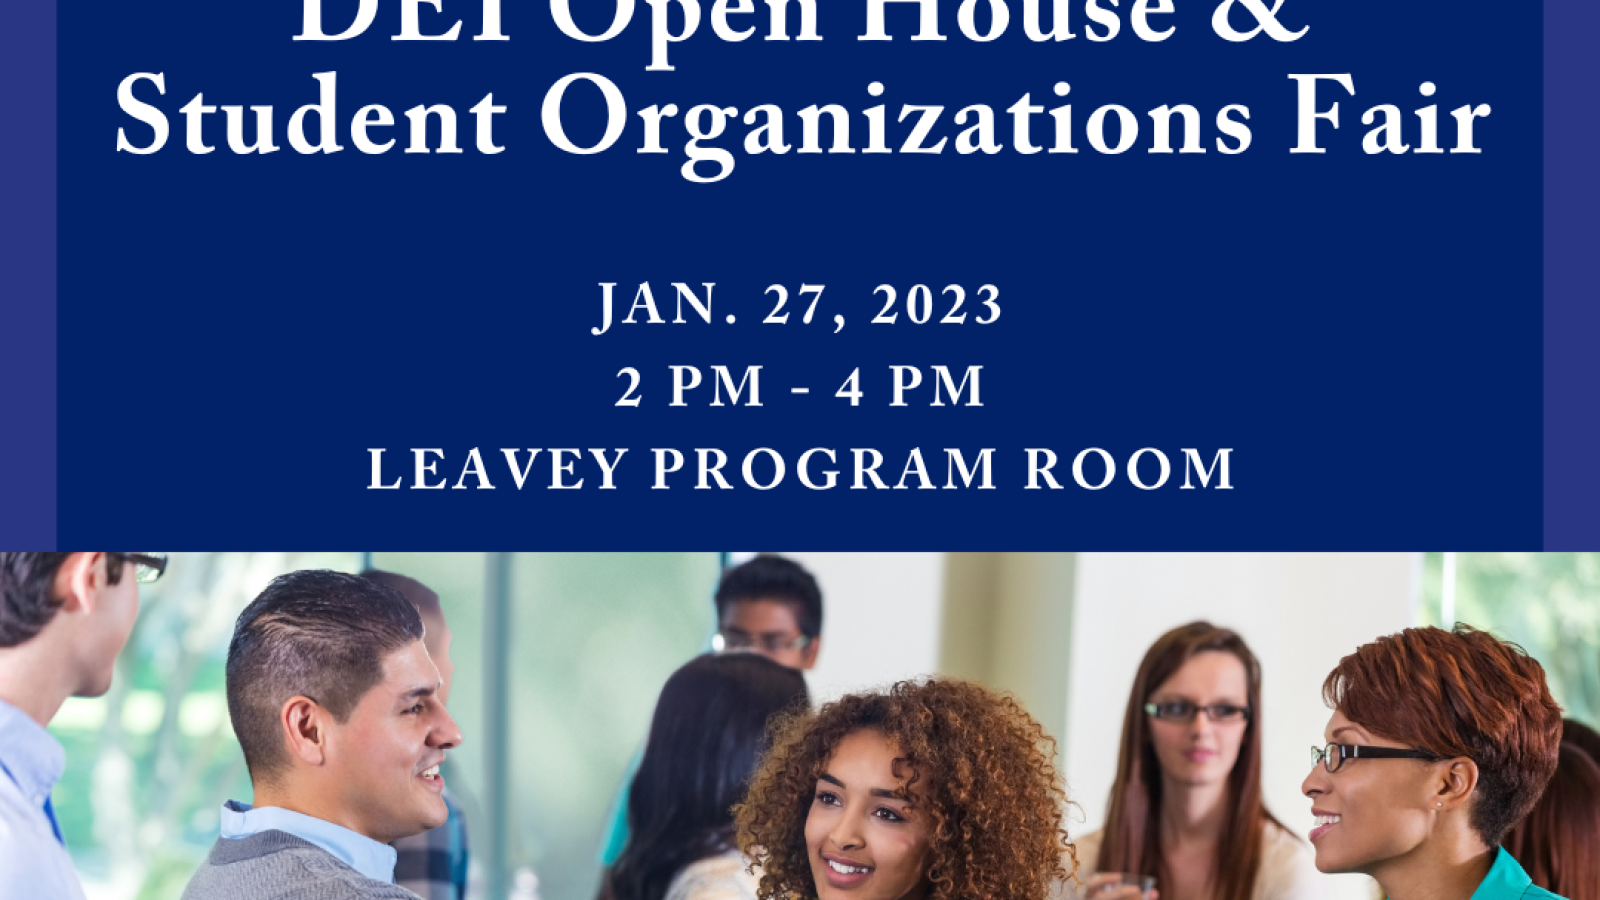 Graphic with photograph of individuals shaking hand and text, &quot;GSAS Office of Graduate Enrichment: DEI Open House &amp; Student Organizations Fair.&quot;